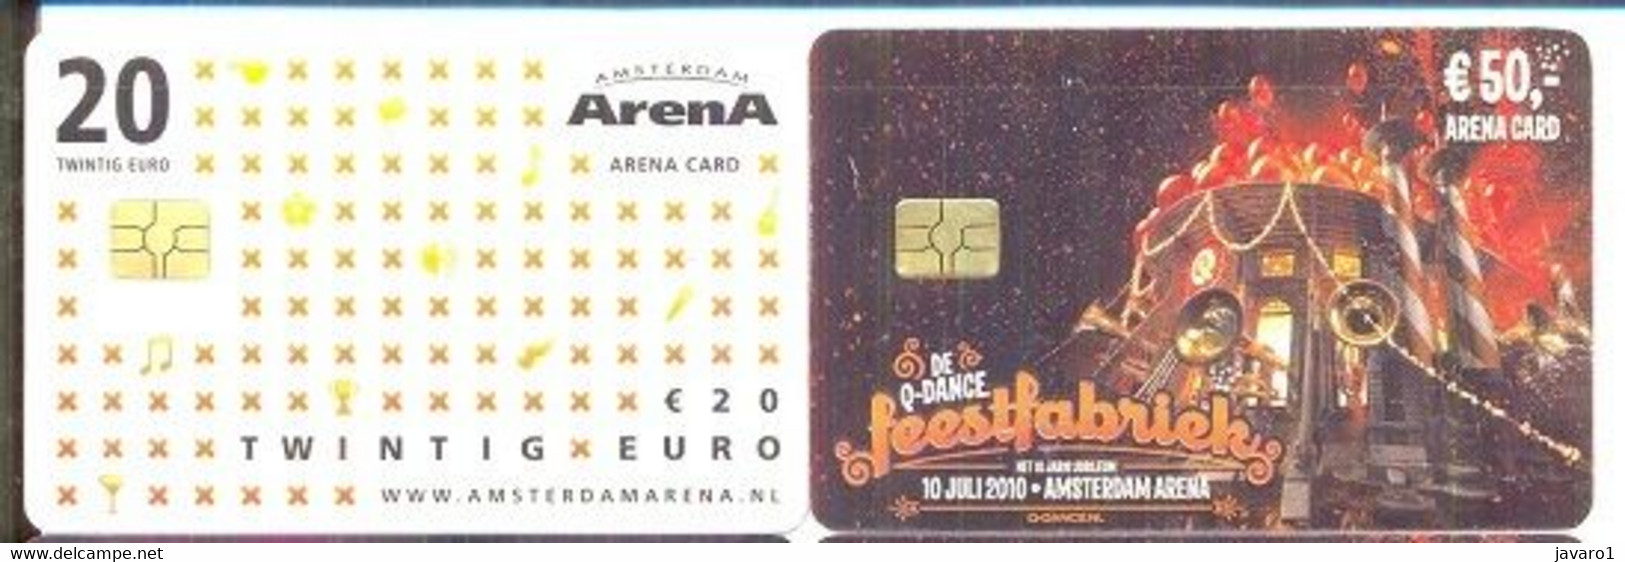 ARENA CARD : 2 Cards As Pictured - To Identify